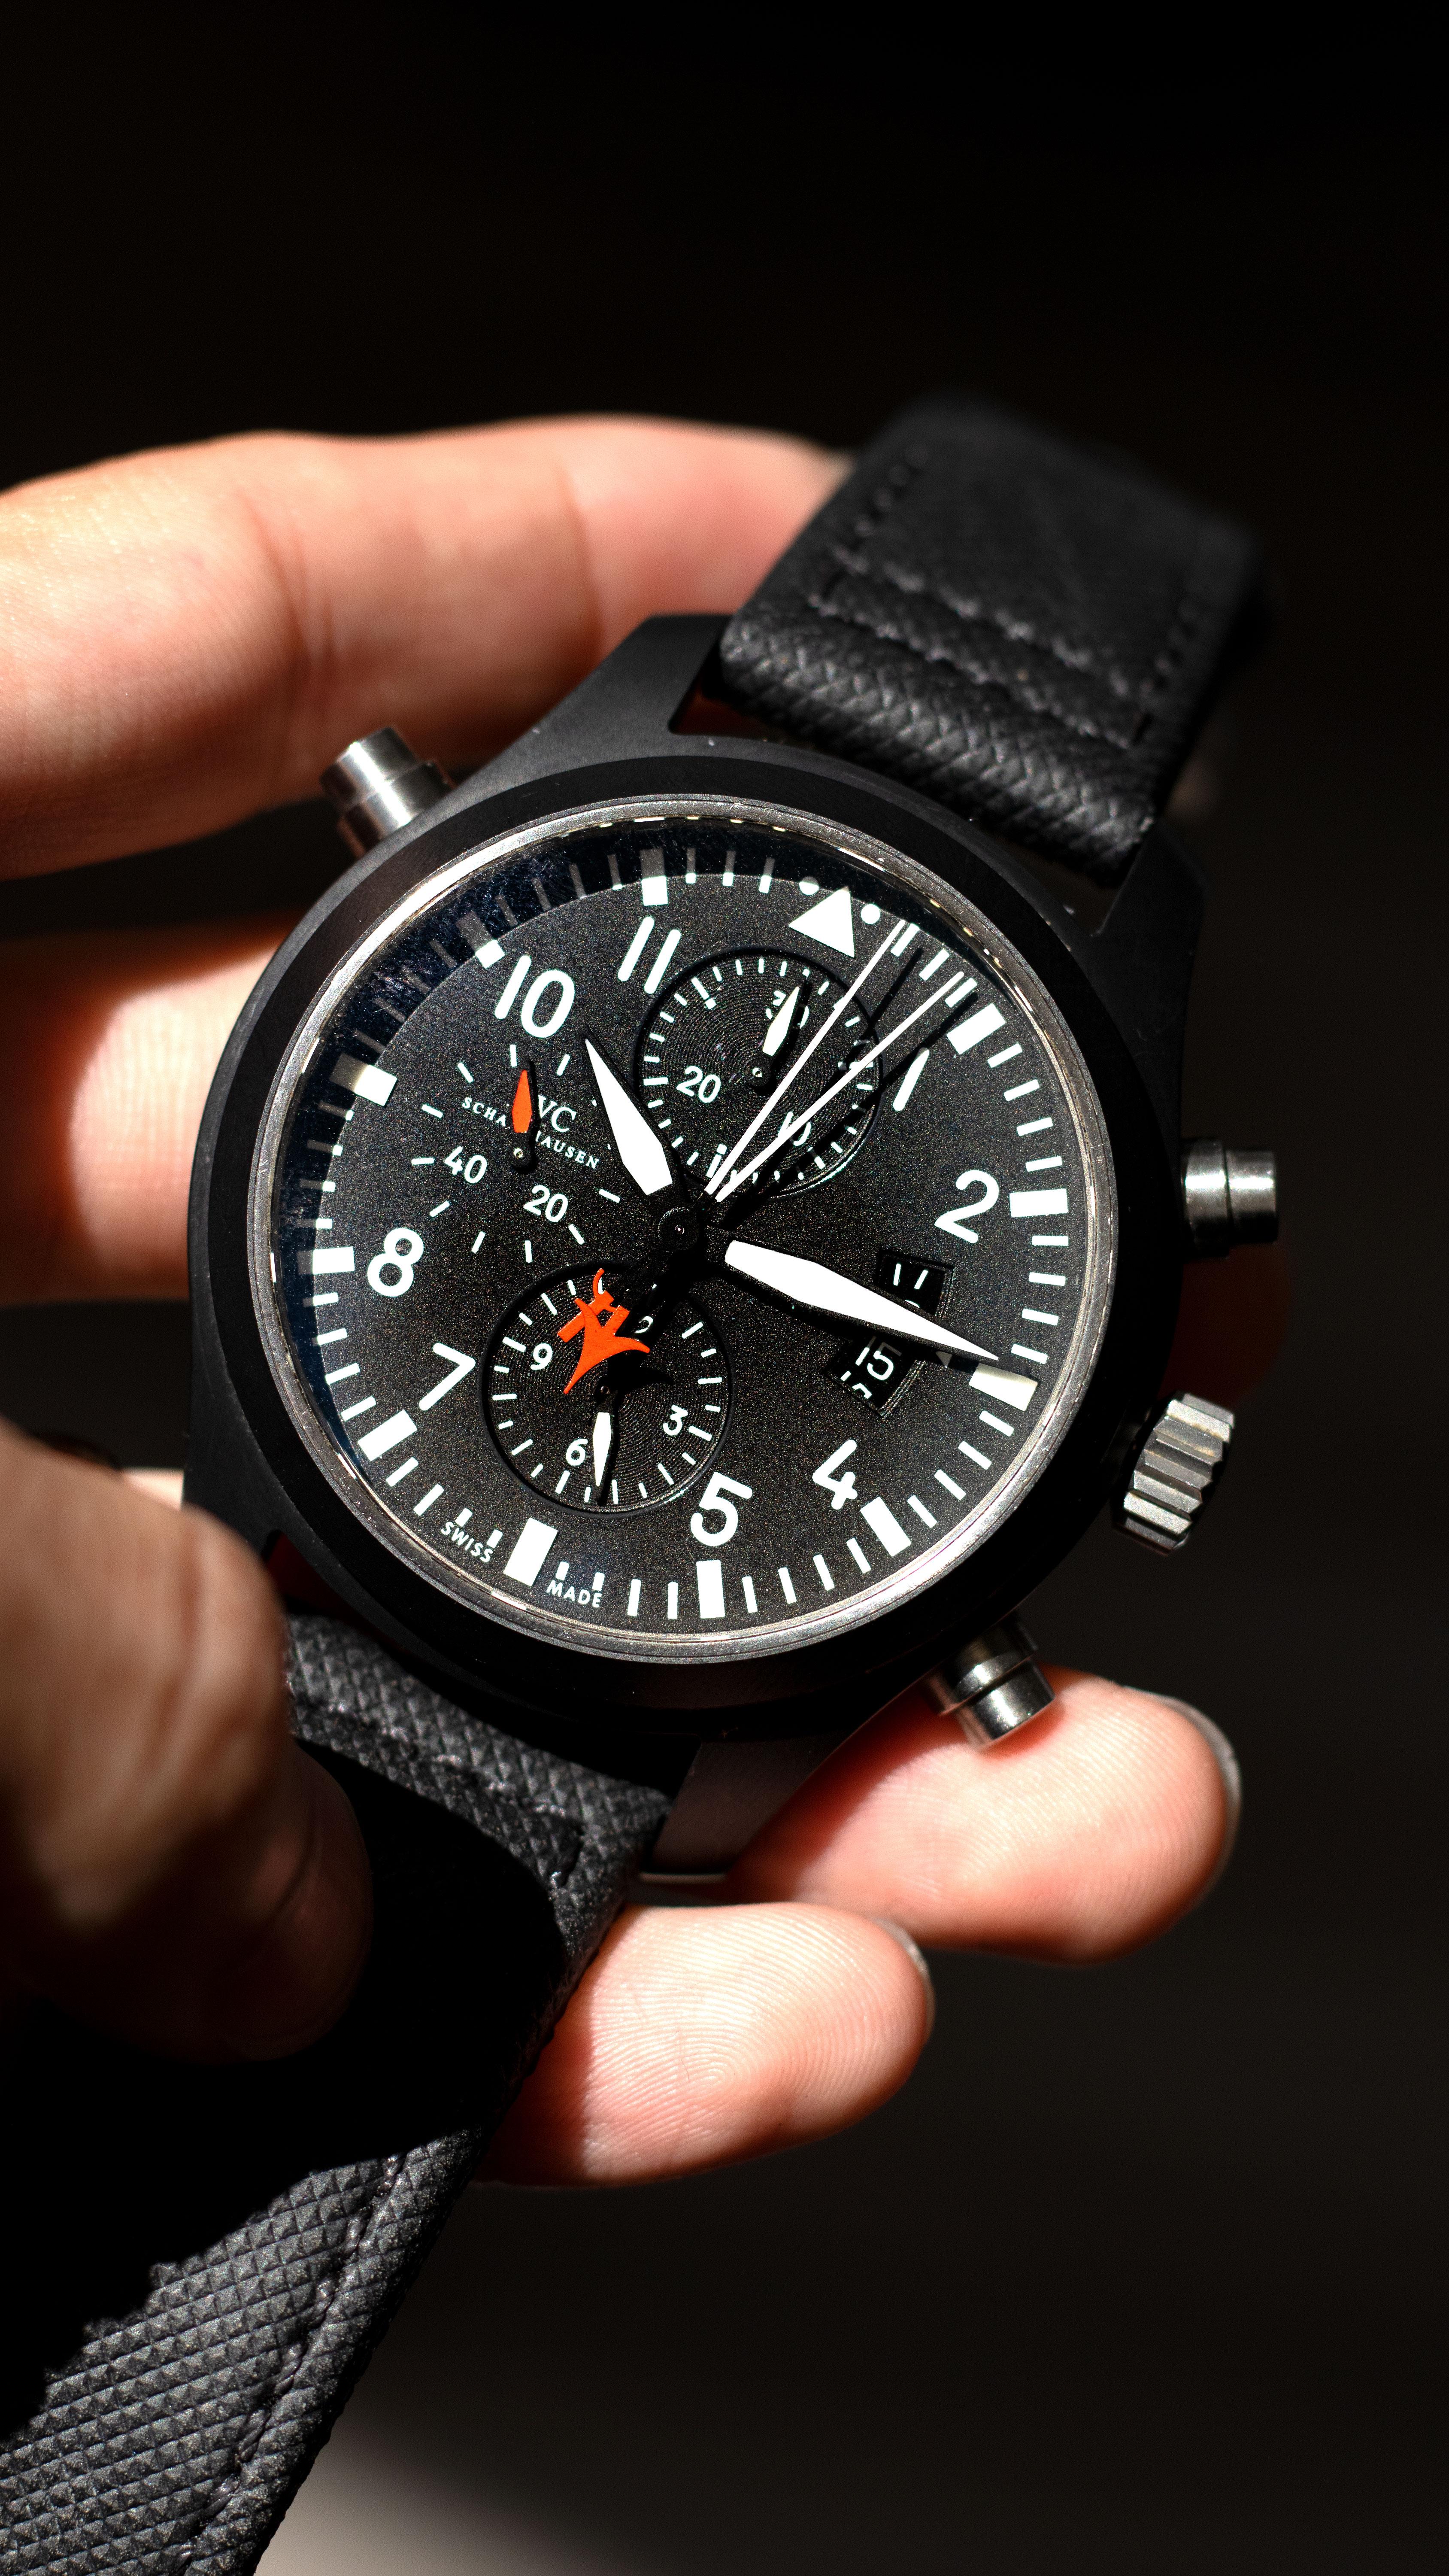 IWC Big Pilot Stainless Steel Top Gun Edition Watch

Brand: IWC

Model: Big Pilot Top Gun Edition

Dial: Black dial with luminescent hands, date can be found at 6 o' clock

Case: Stainless steel

Bracelet: Two piece fabric strap

Movement: